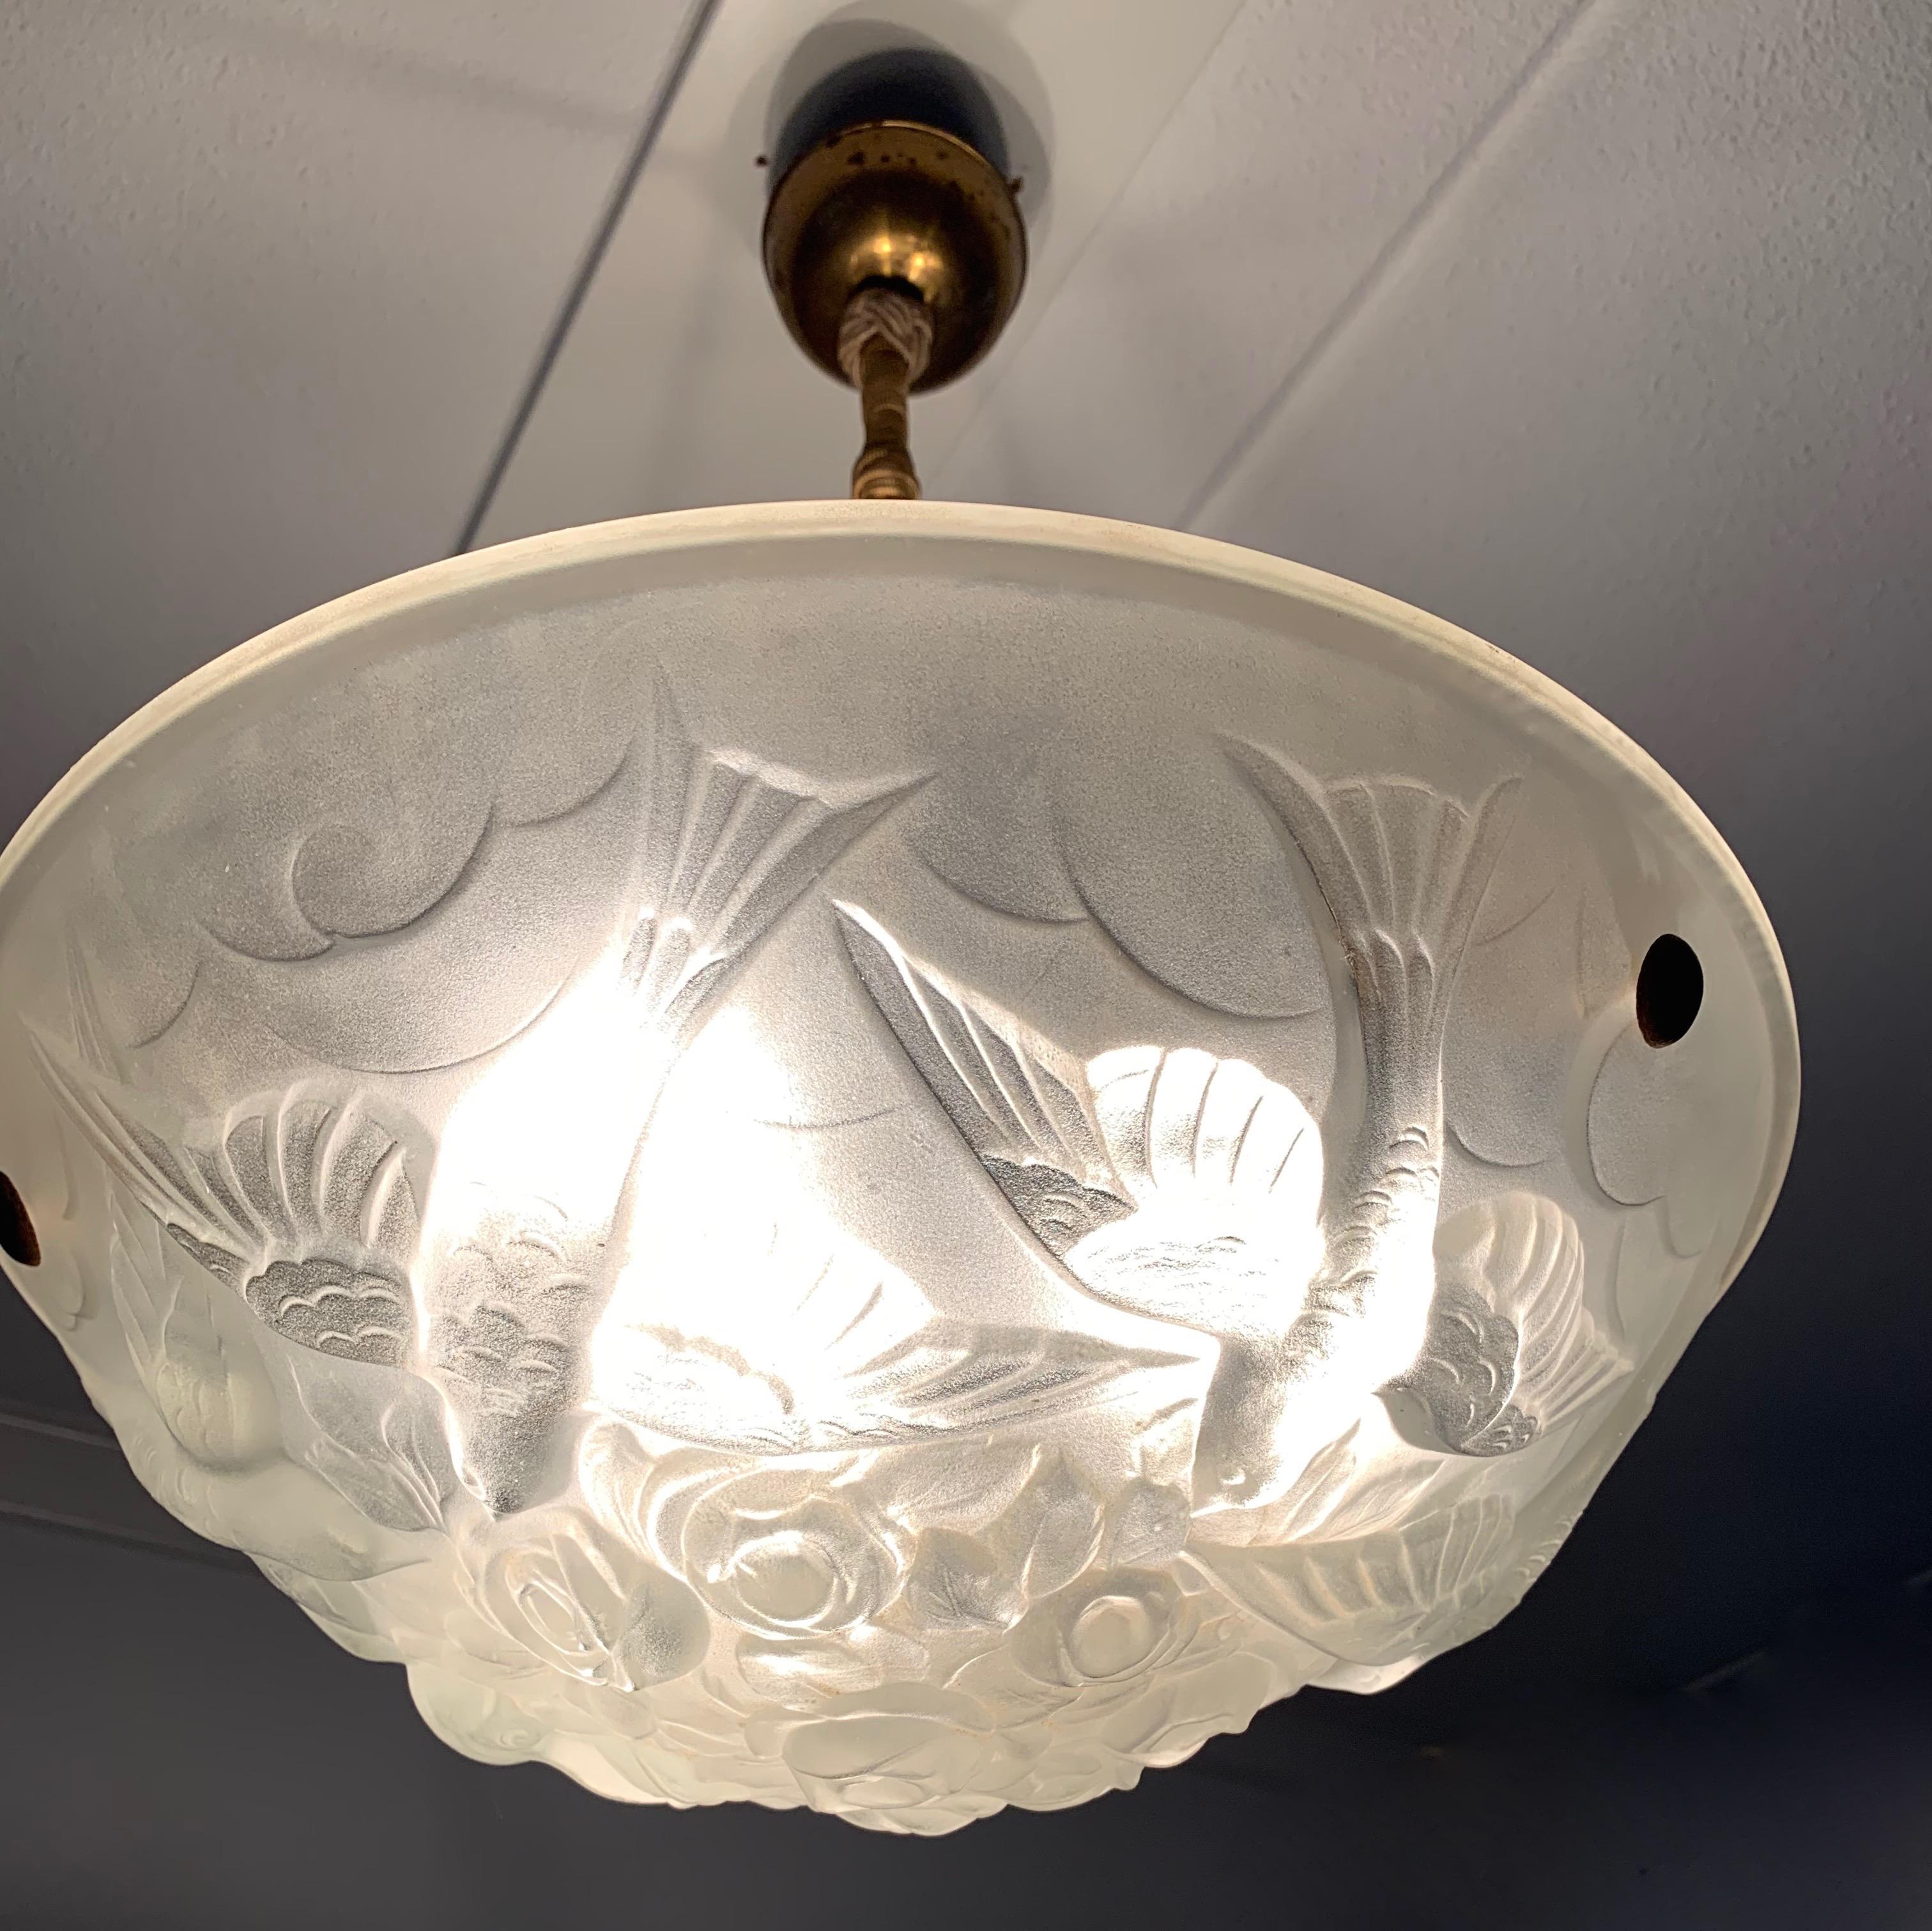 Stylish & Meaningful Art Deco Chandelier, Frosted Glass w. Flying Pigeons Sabine 4